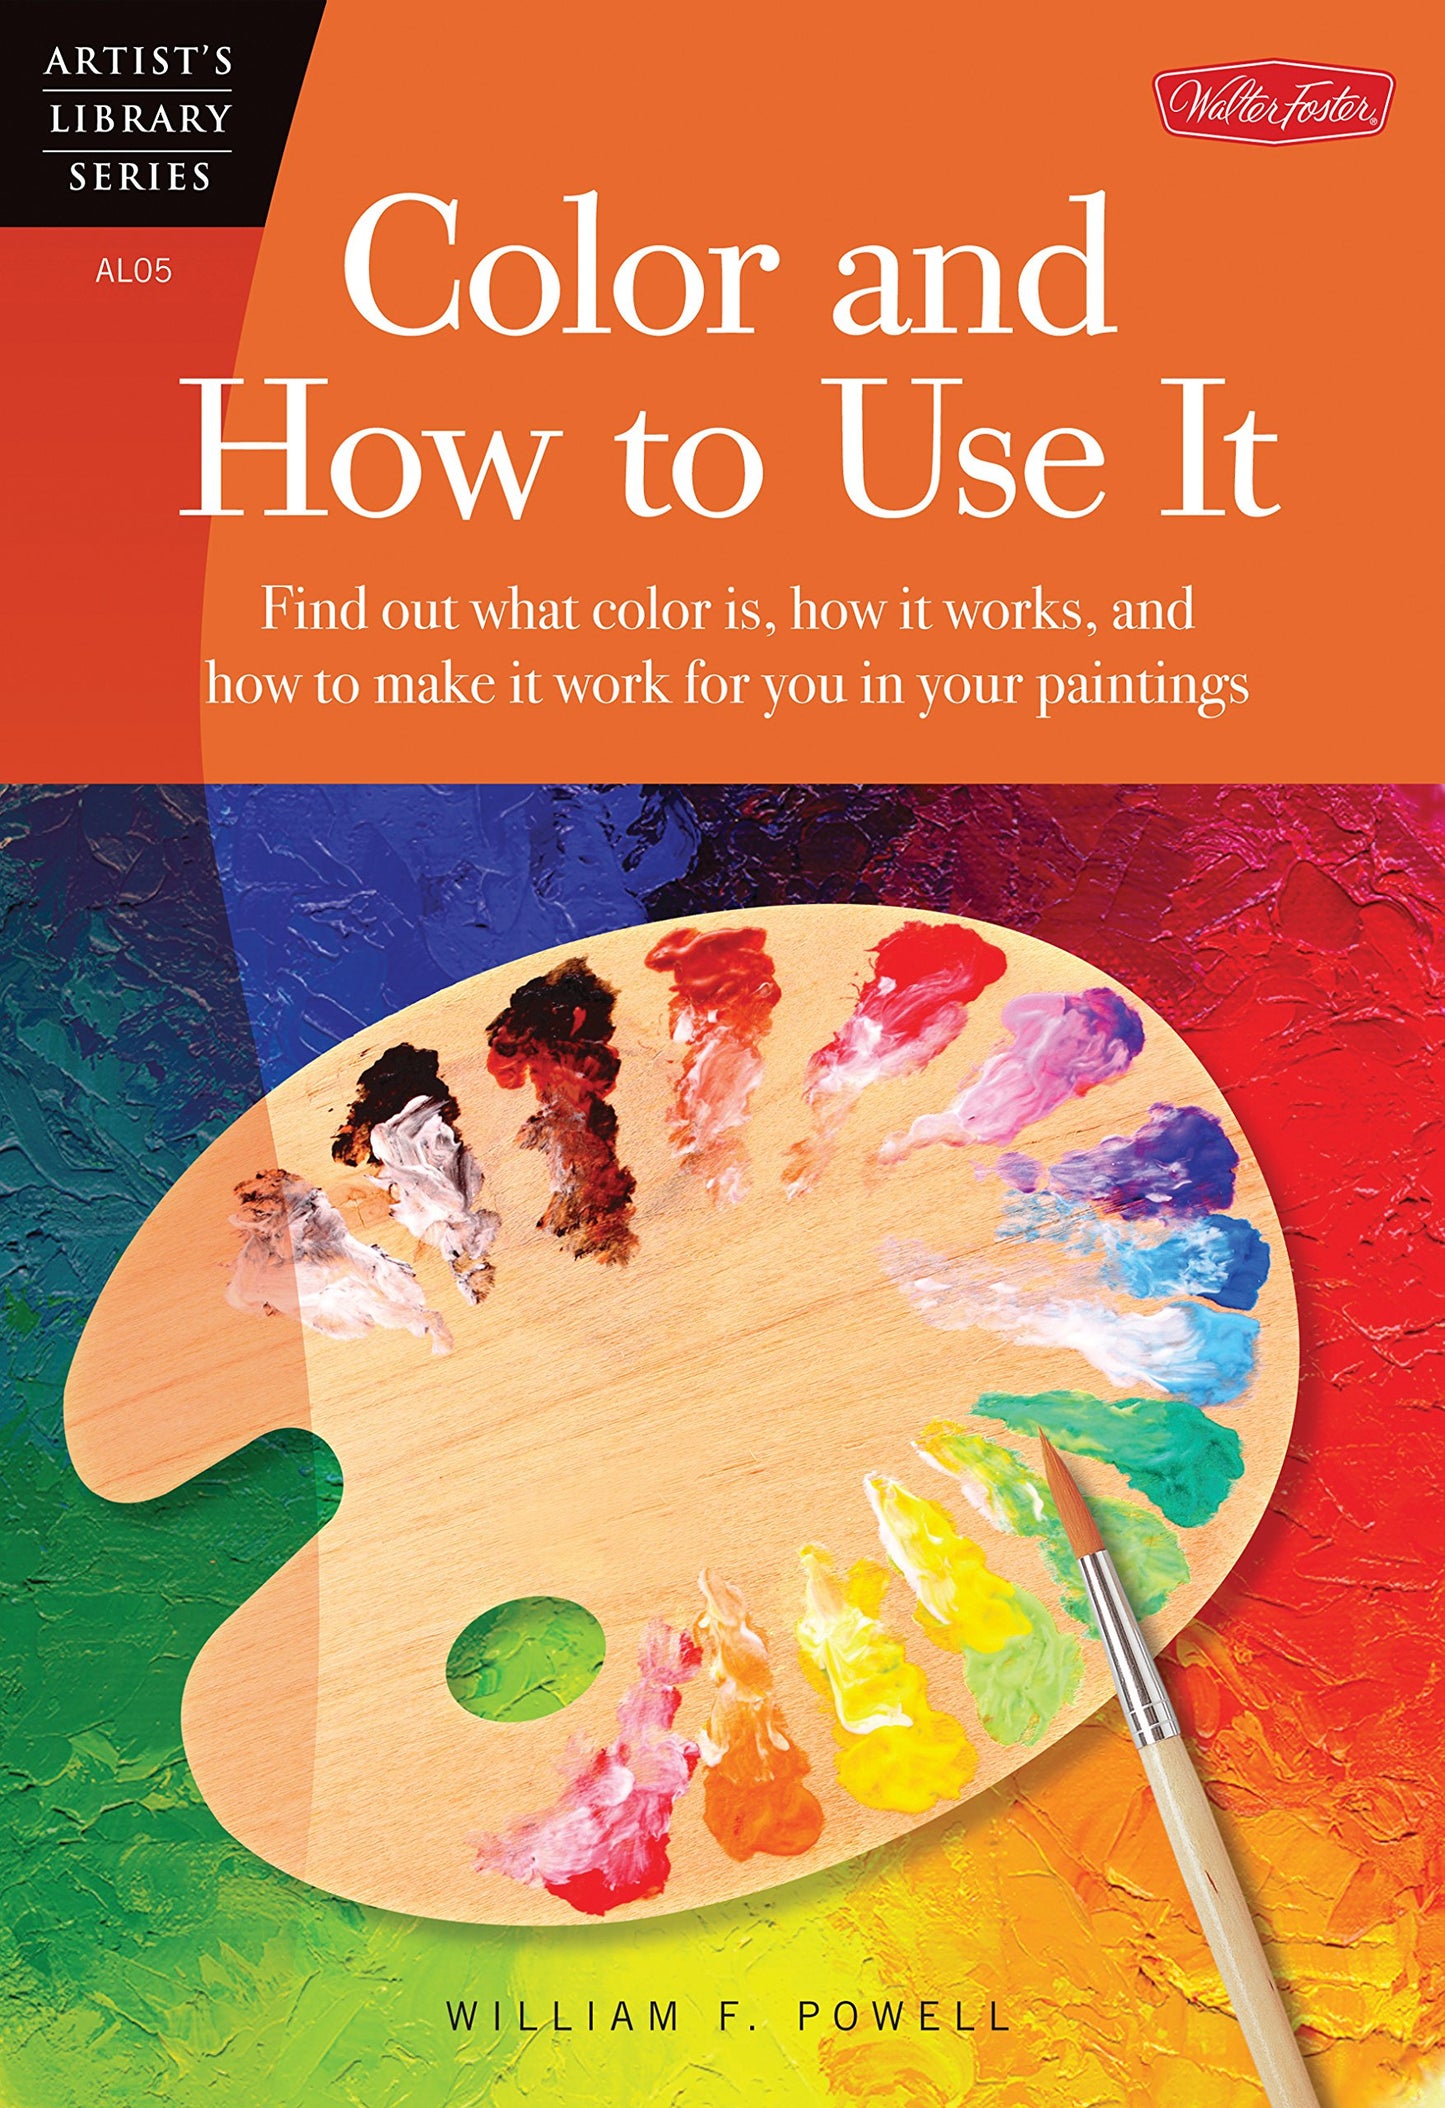 Color and How to Use It (Artist's Library series #05)